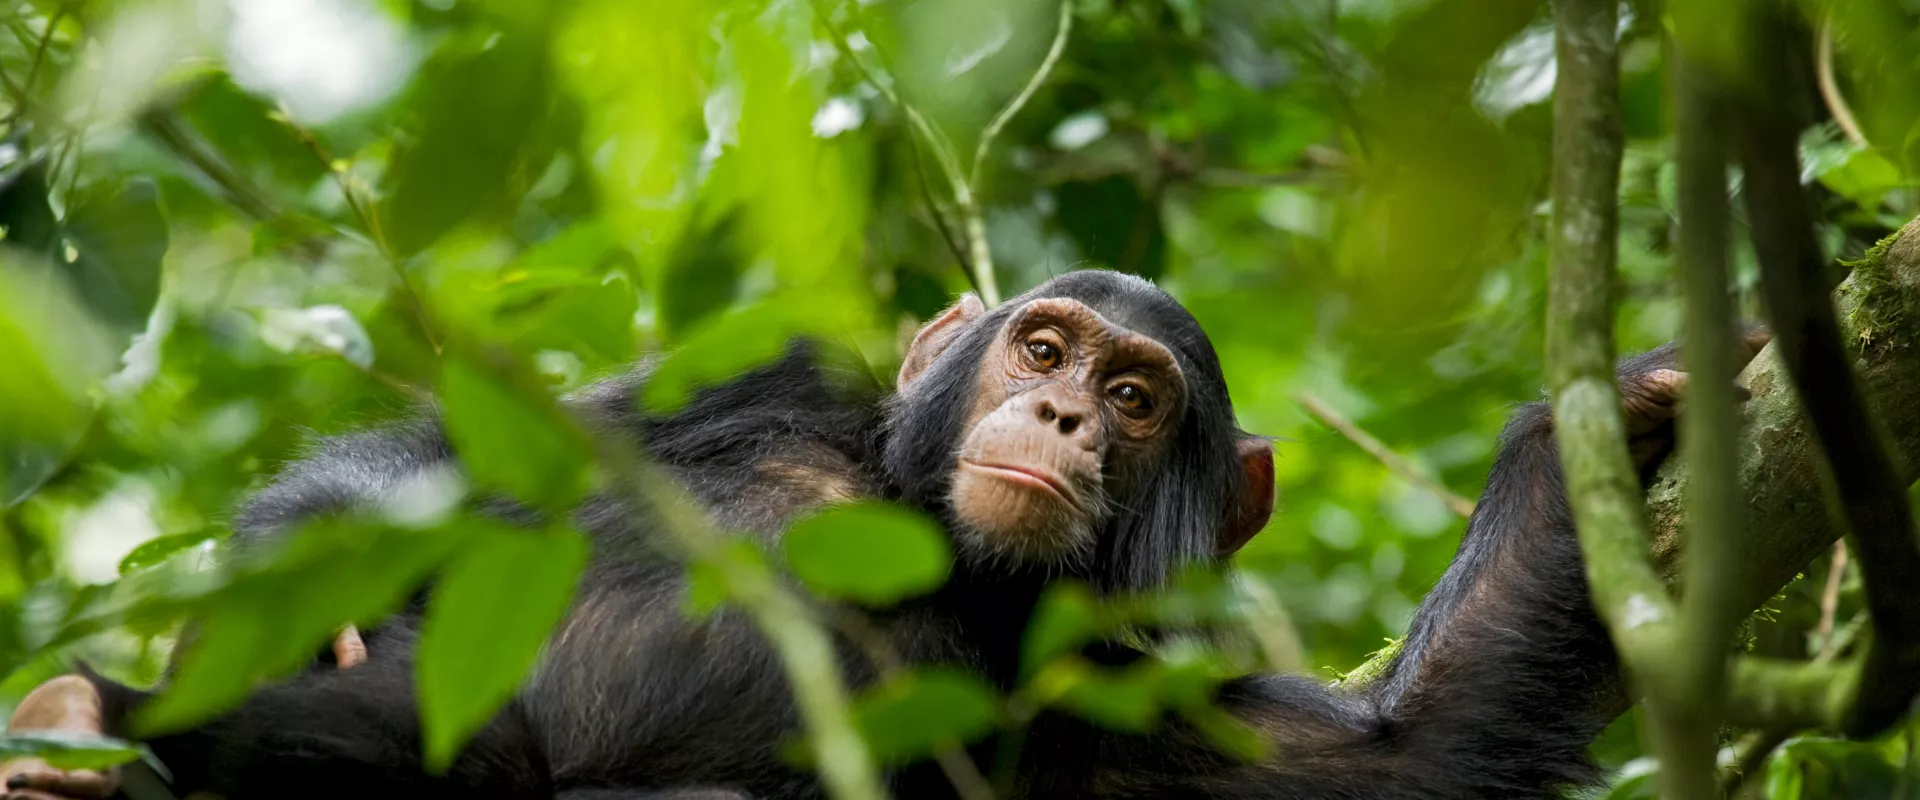 Protecting Chimpanzees from Snares